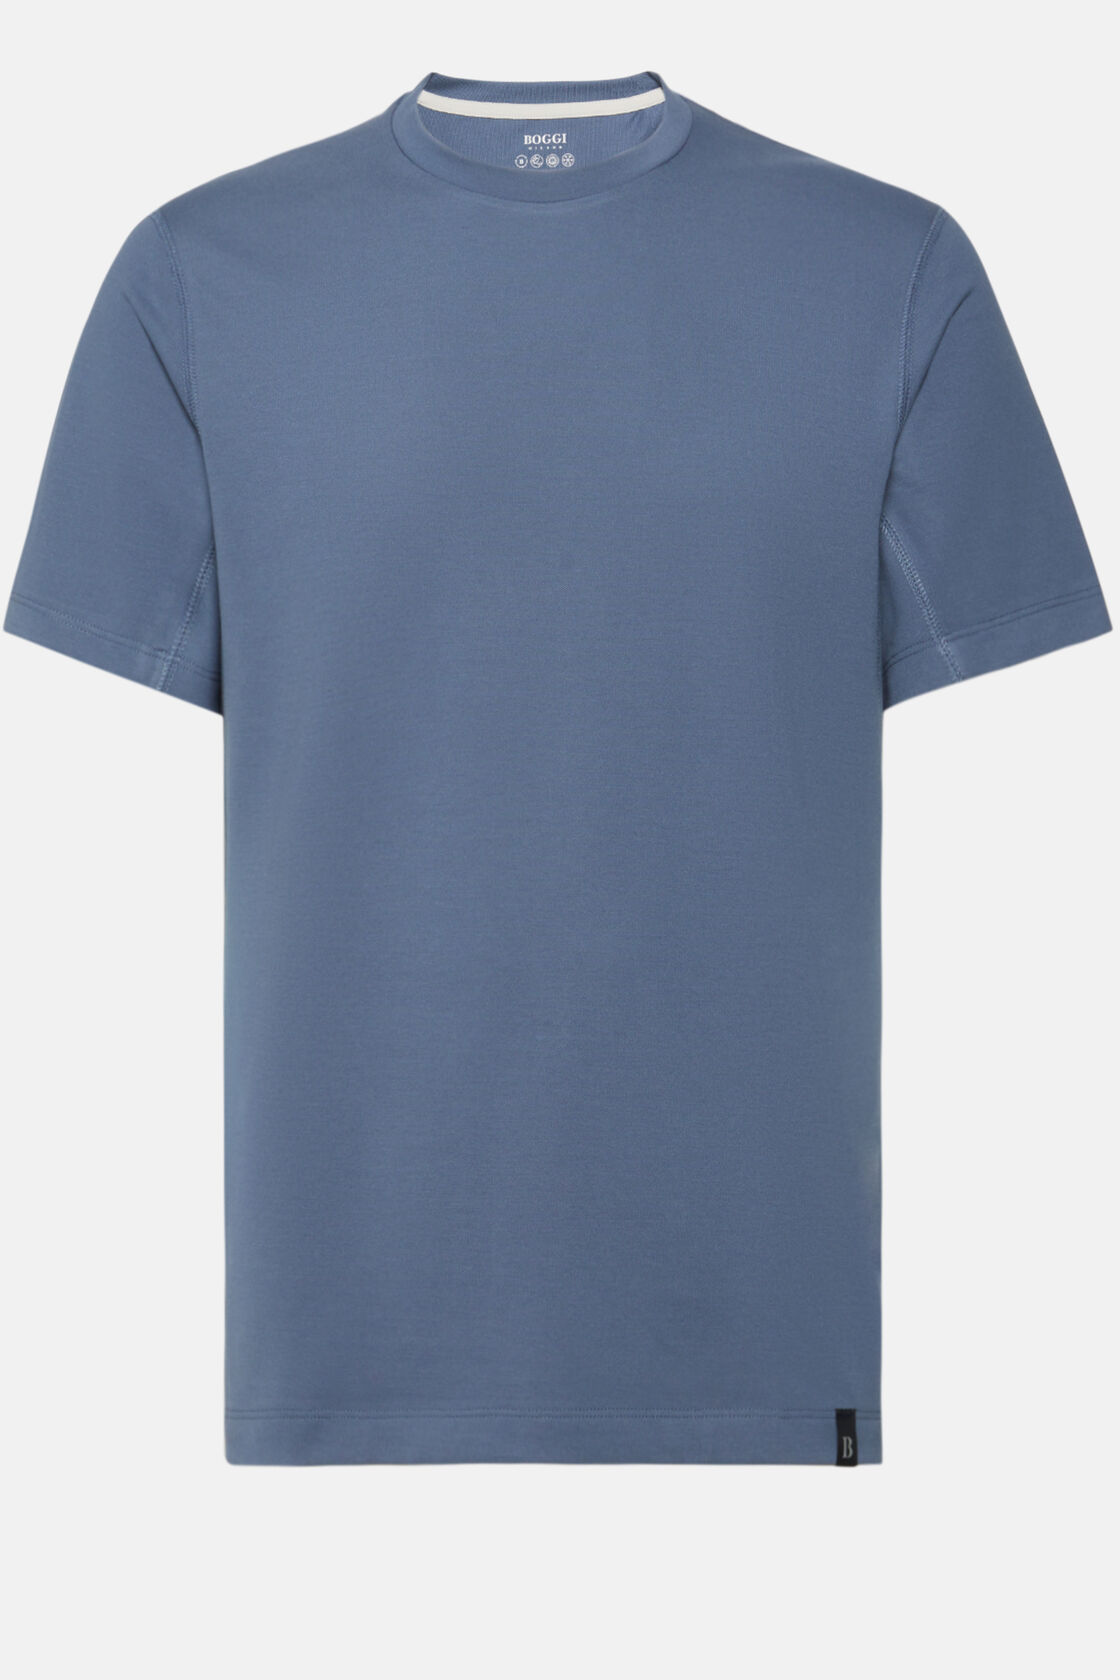 T-Shirt in Sustainable Performance Pique, Air-blue, hi-res